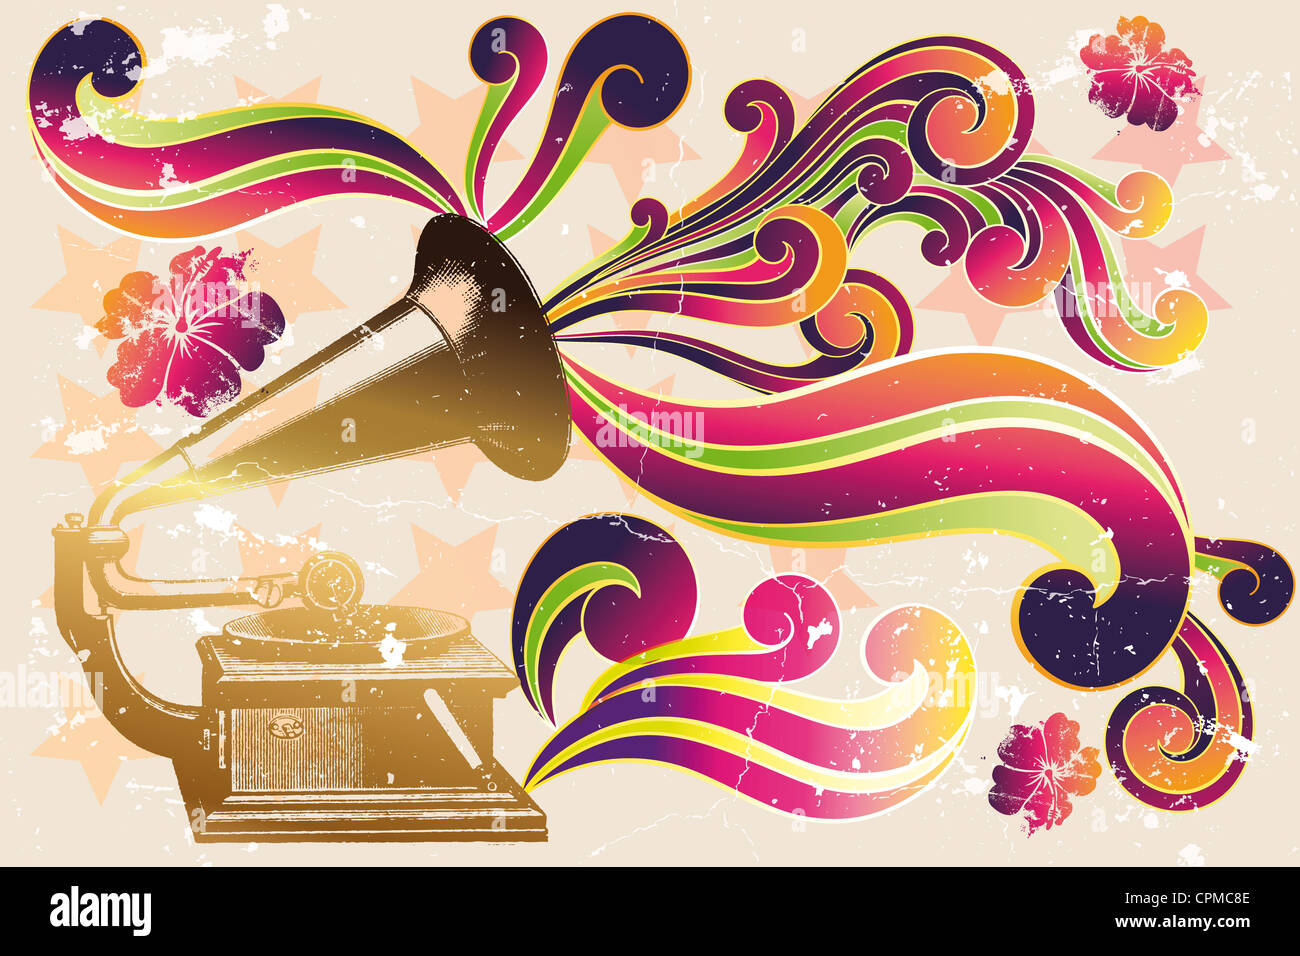 Retro vintage poster with record player, hibiscus, colorful waves and  shapes, stars on grunge background Stock Photo - Alamy